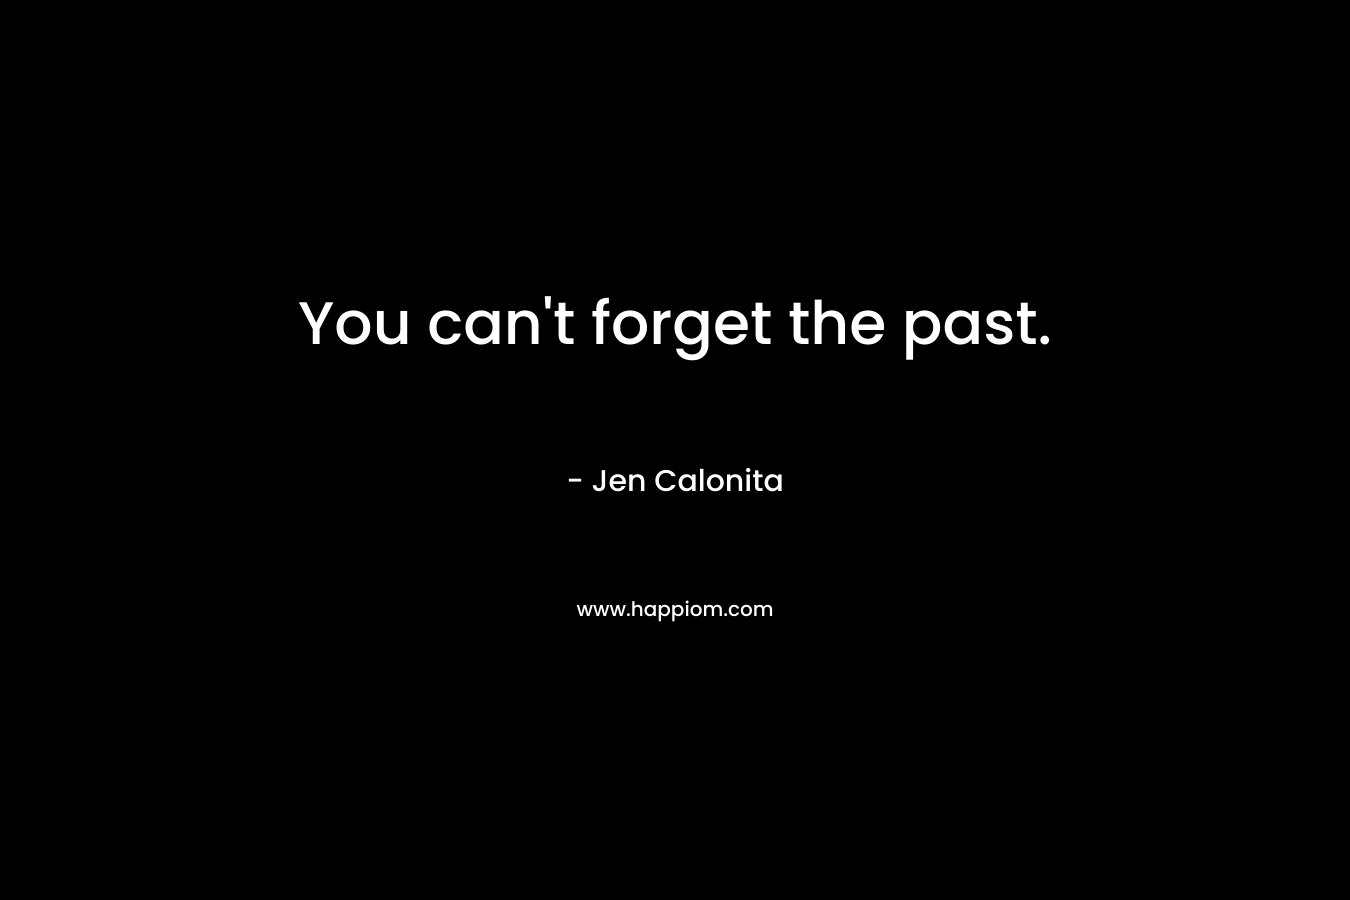 You can't forget the past.